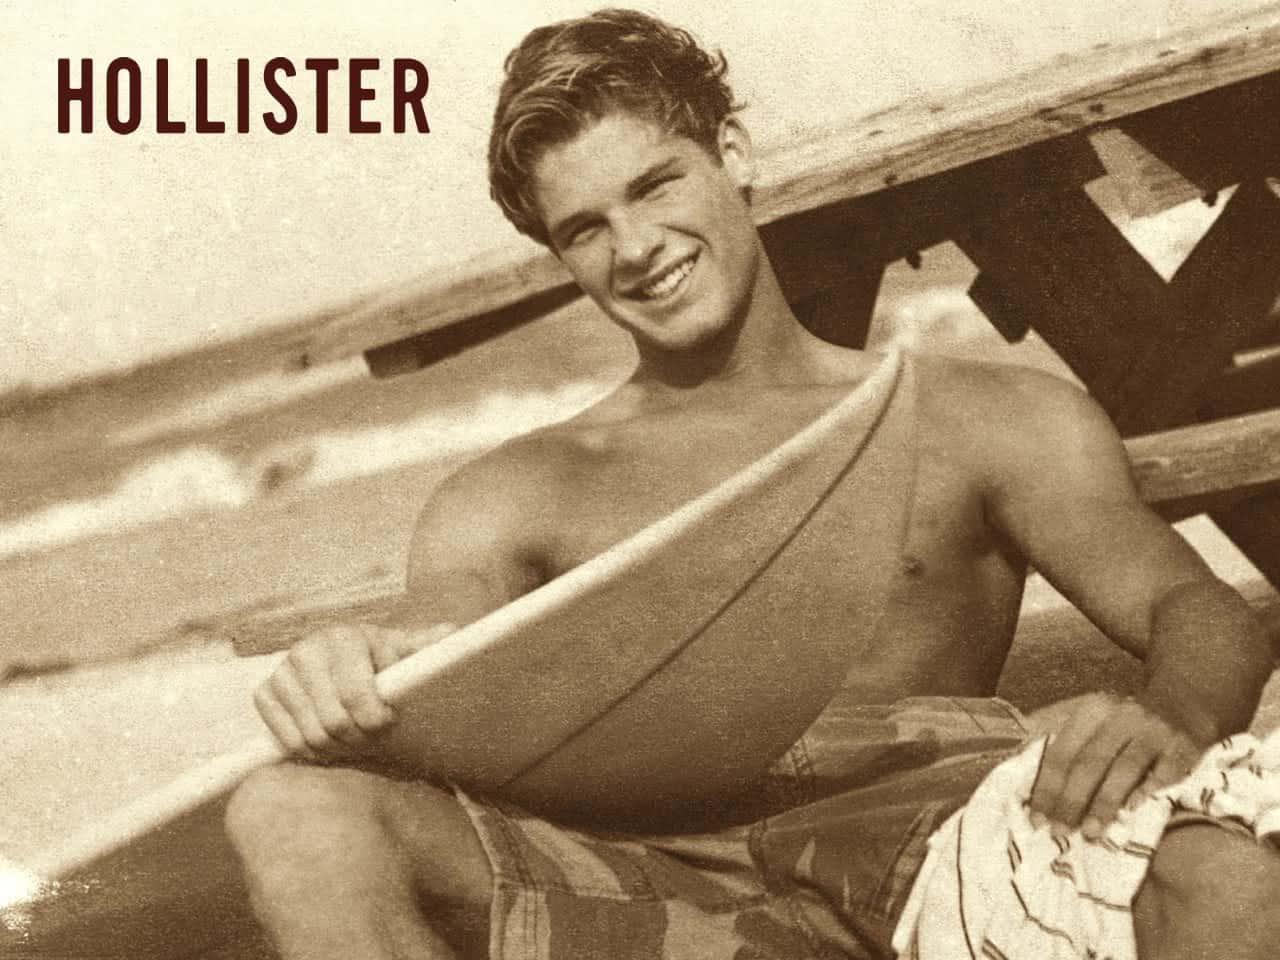 Fuel your wardrobe with the latest trends from Hollister.